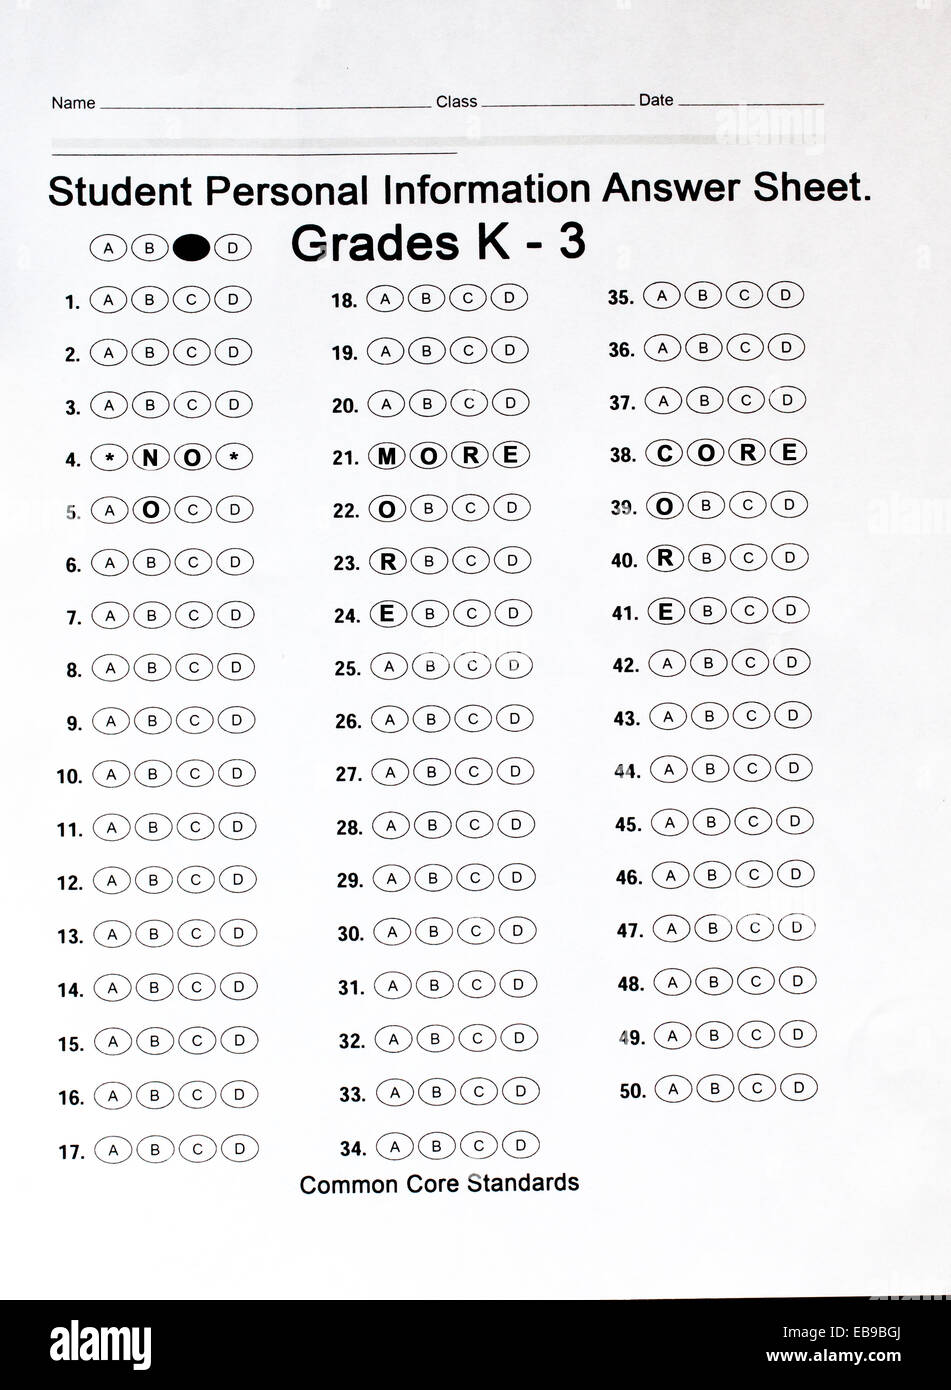 A photo of an test answer sheet spelling No More Core